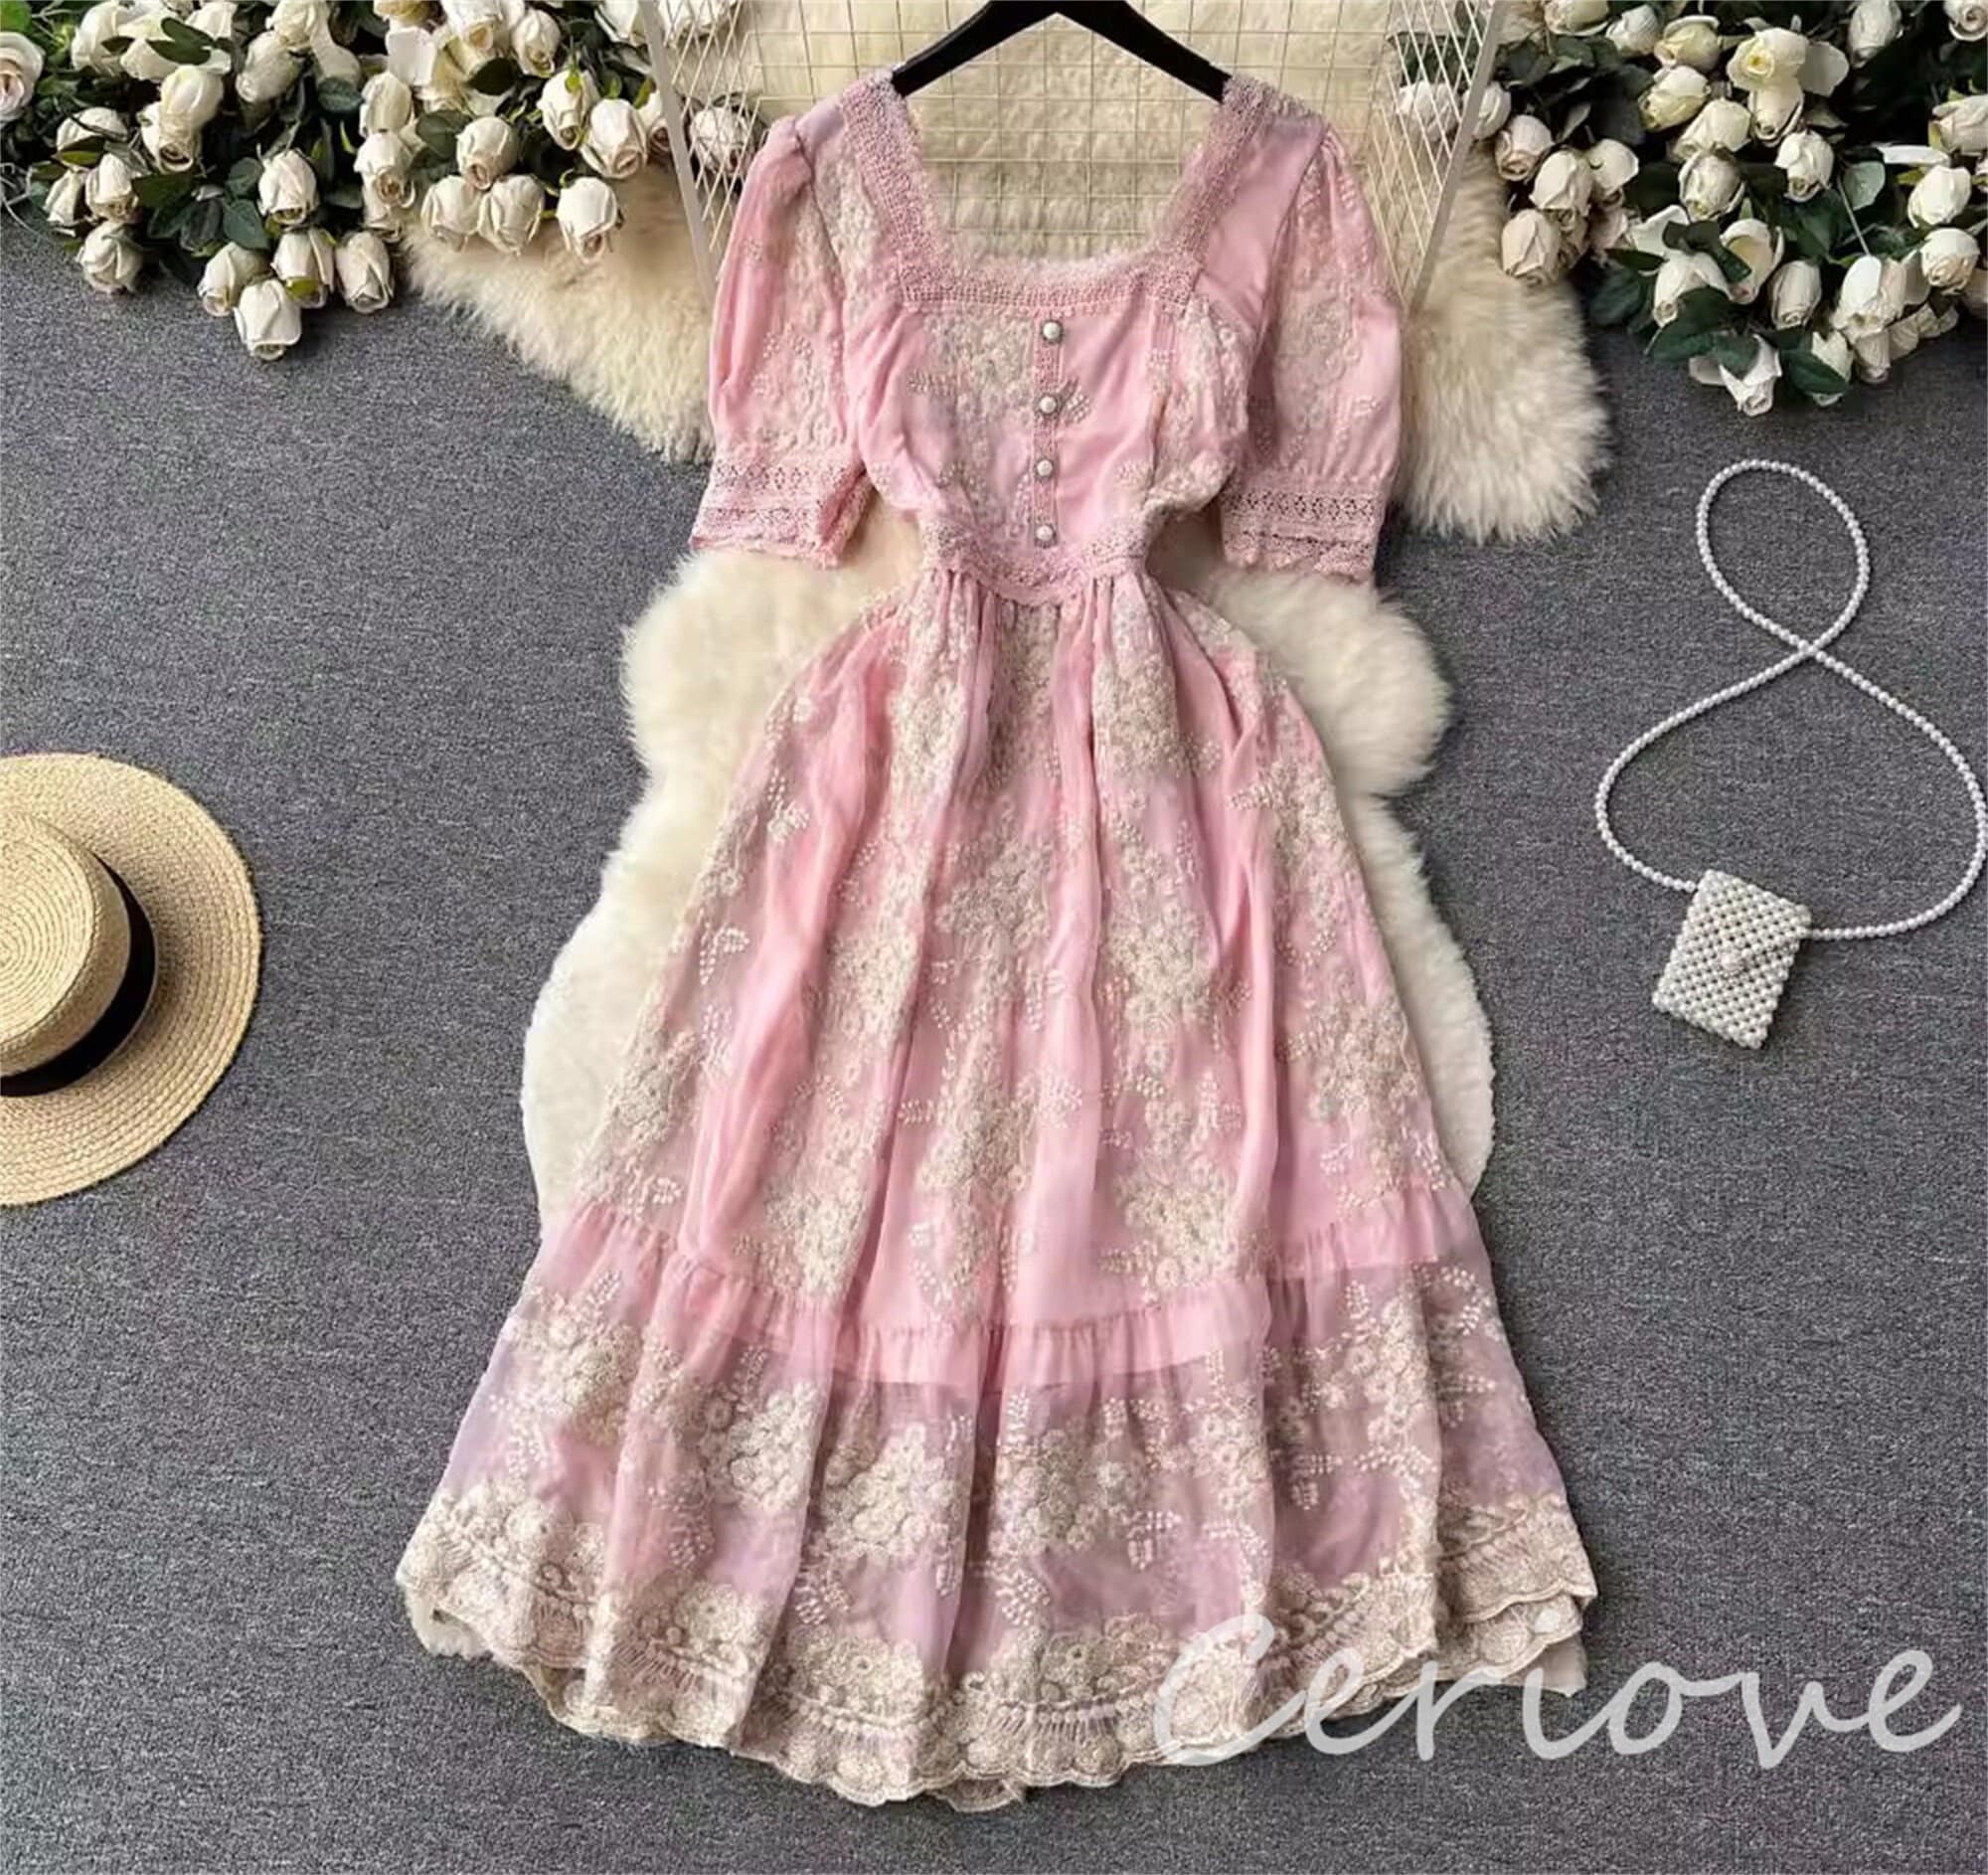 Embroider Lace Dress - Etsy